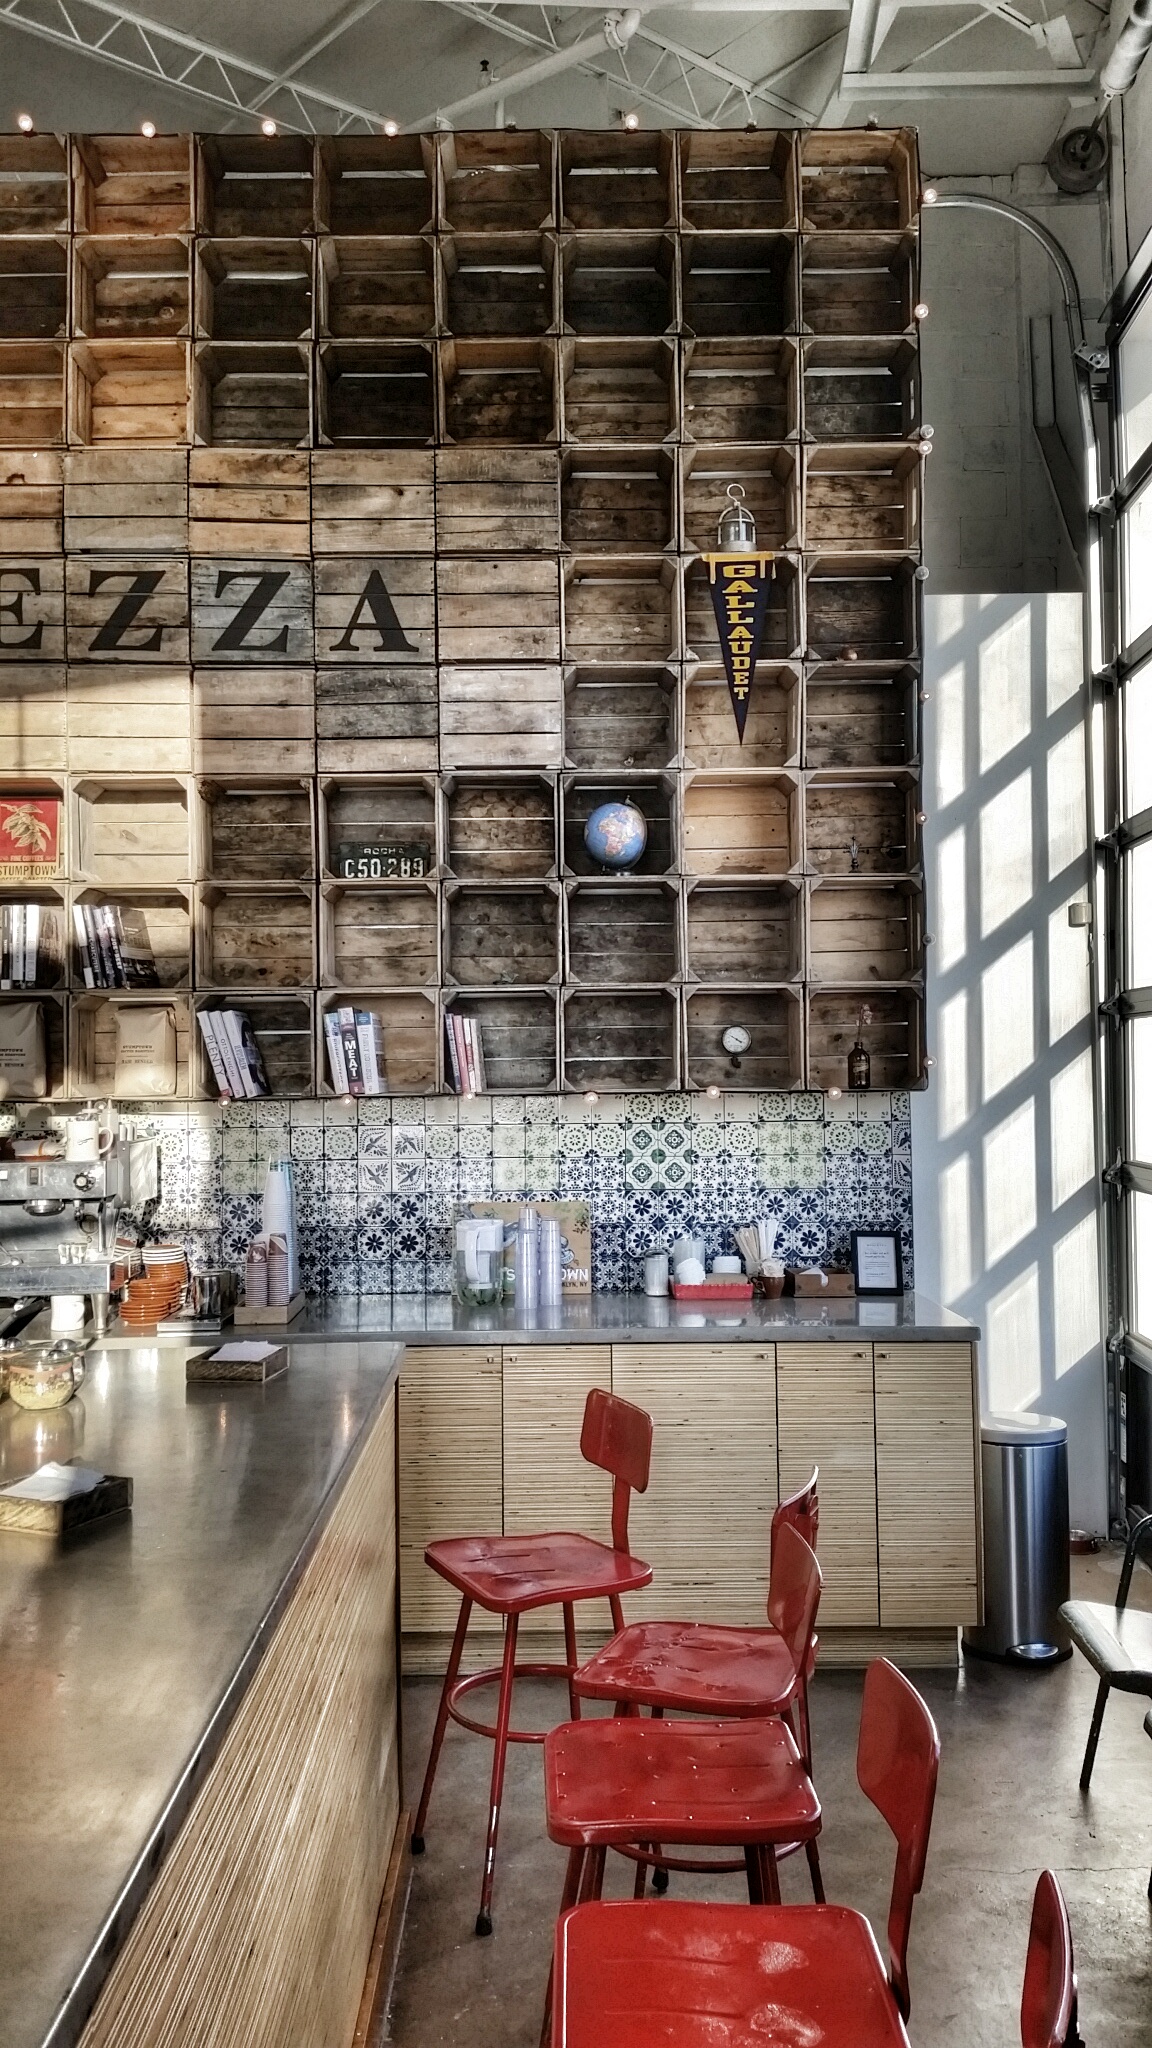 The Instagram-worthy interior of Dolcezza Factory - stop by for coffee or gelato and bask in the warm, golden light...